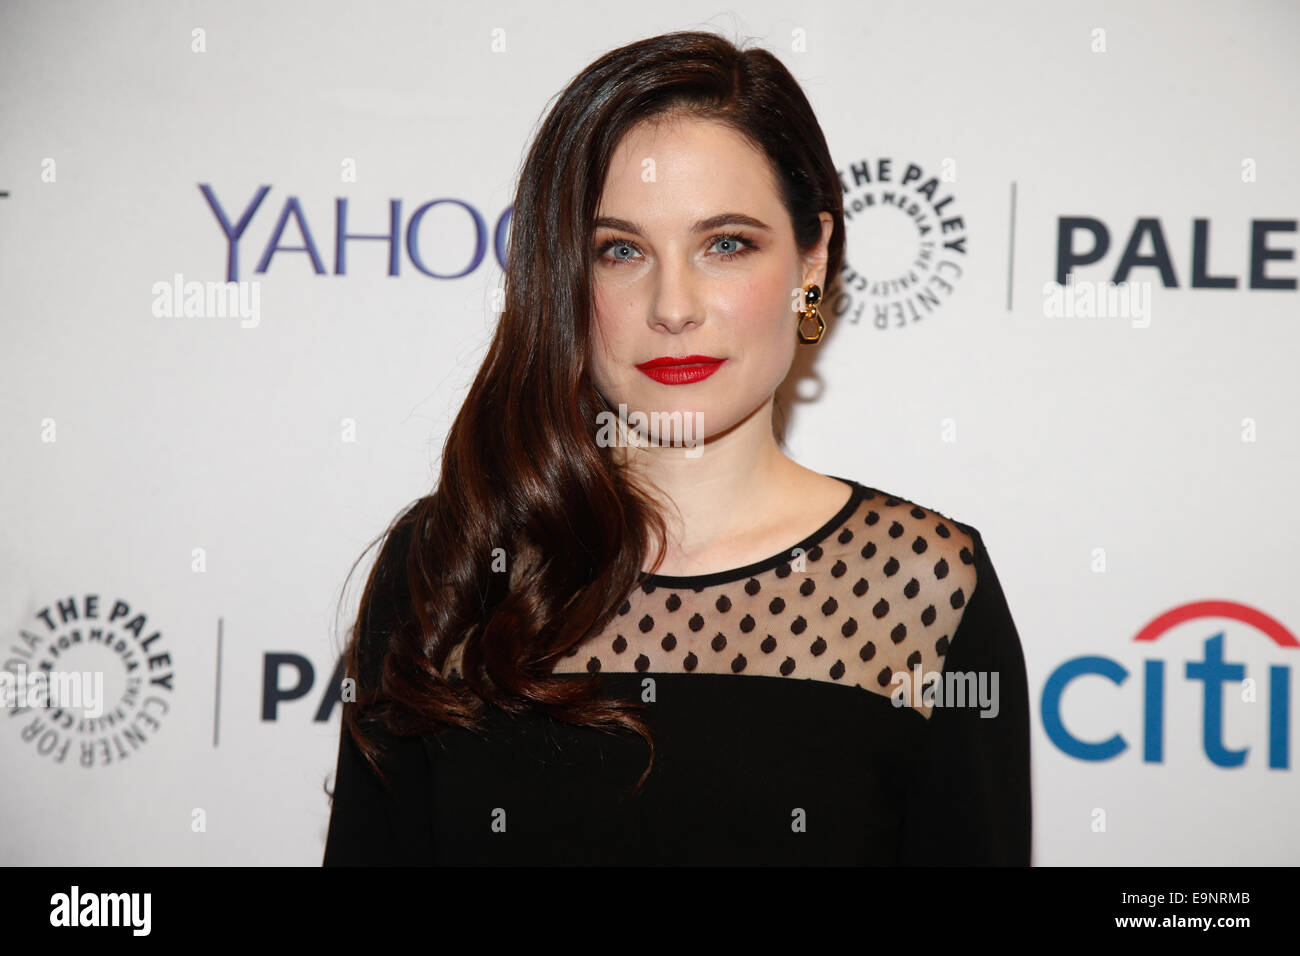 Caroline Dhavernas attends PaleyFest NY 2014 for 'Hannibal' at The Paley Center for Media on October 18, 2014 in New York City. Stock Photo